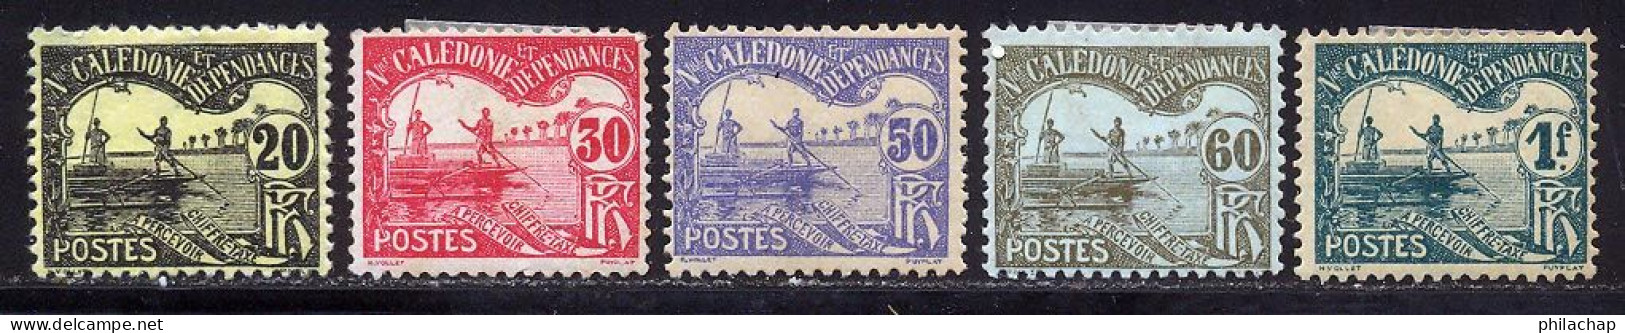 Nouvelle-Caledonie Taxe 1906 Yvert 19 / 23 * B Charniere(s) - Postage Due